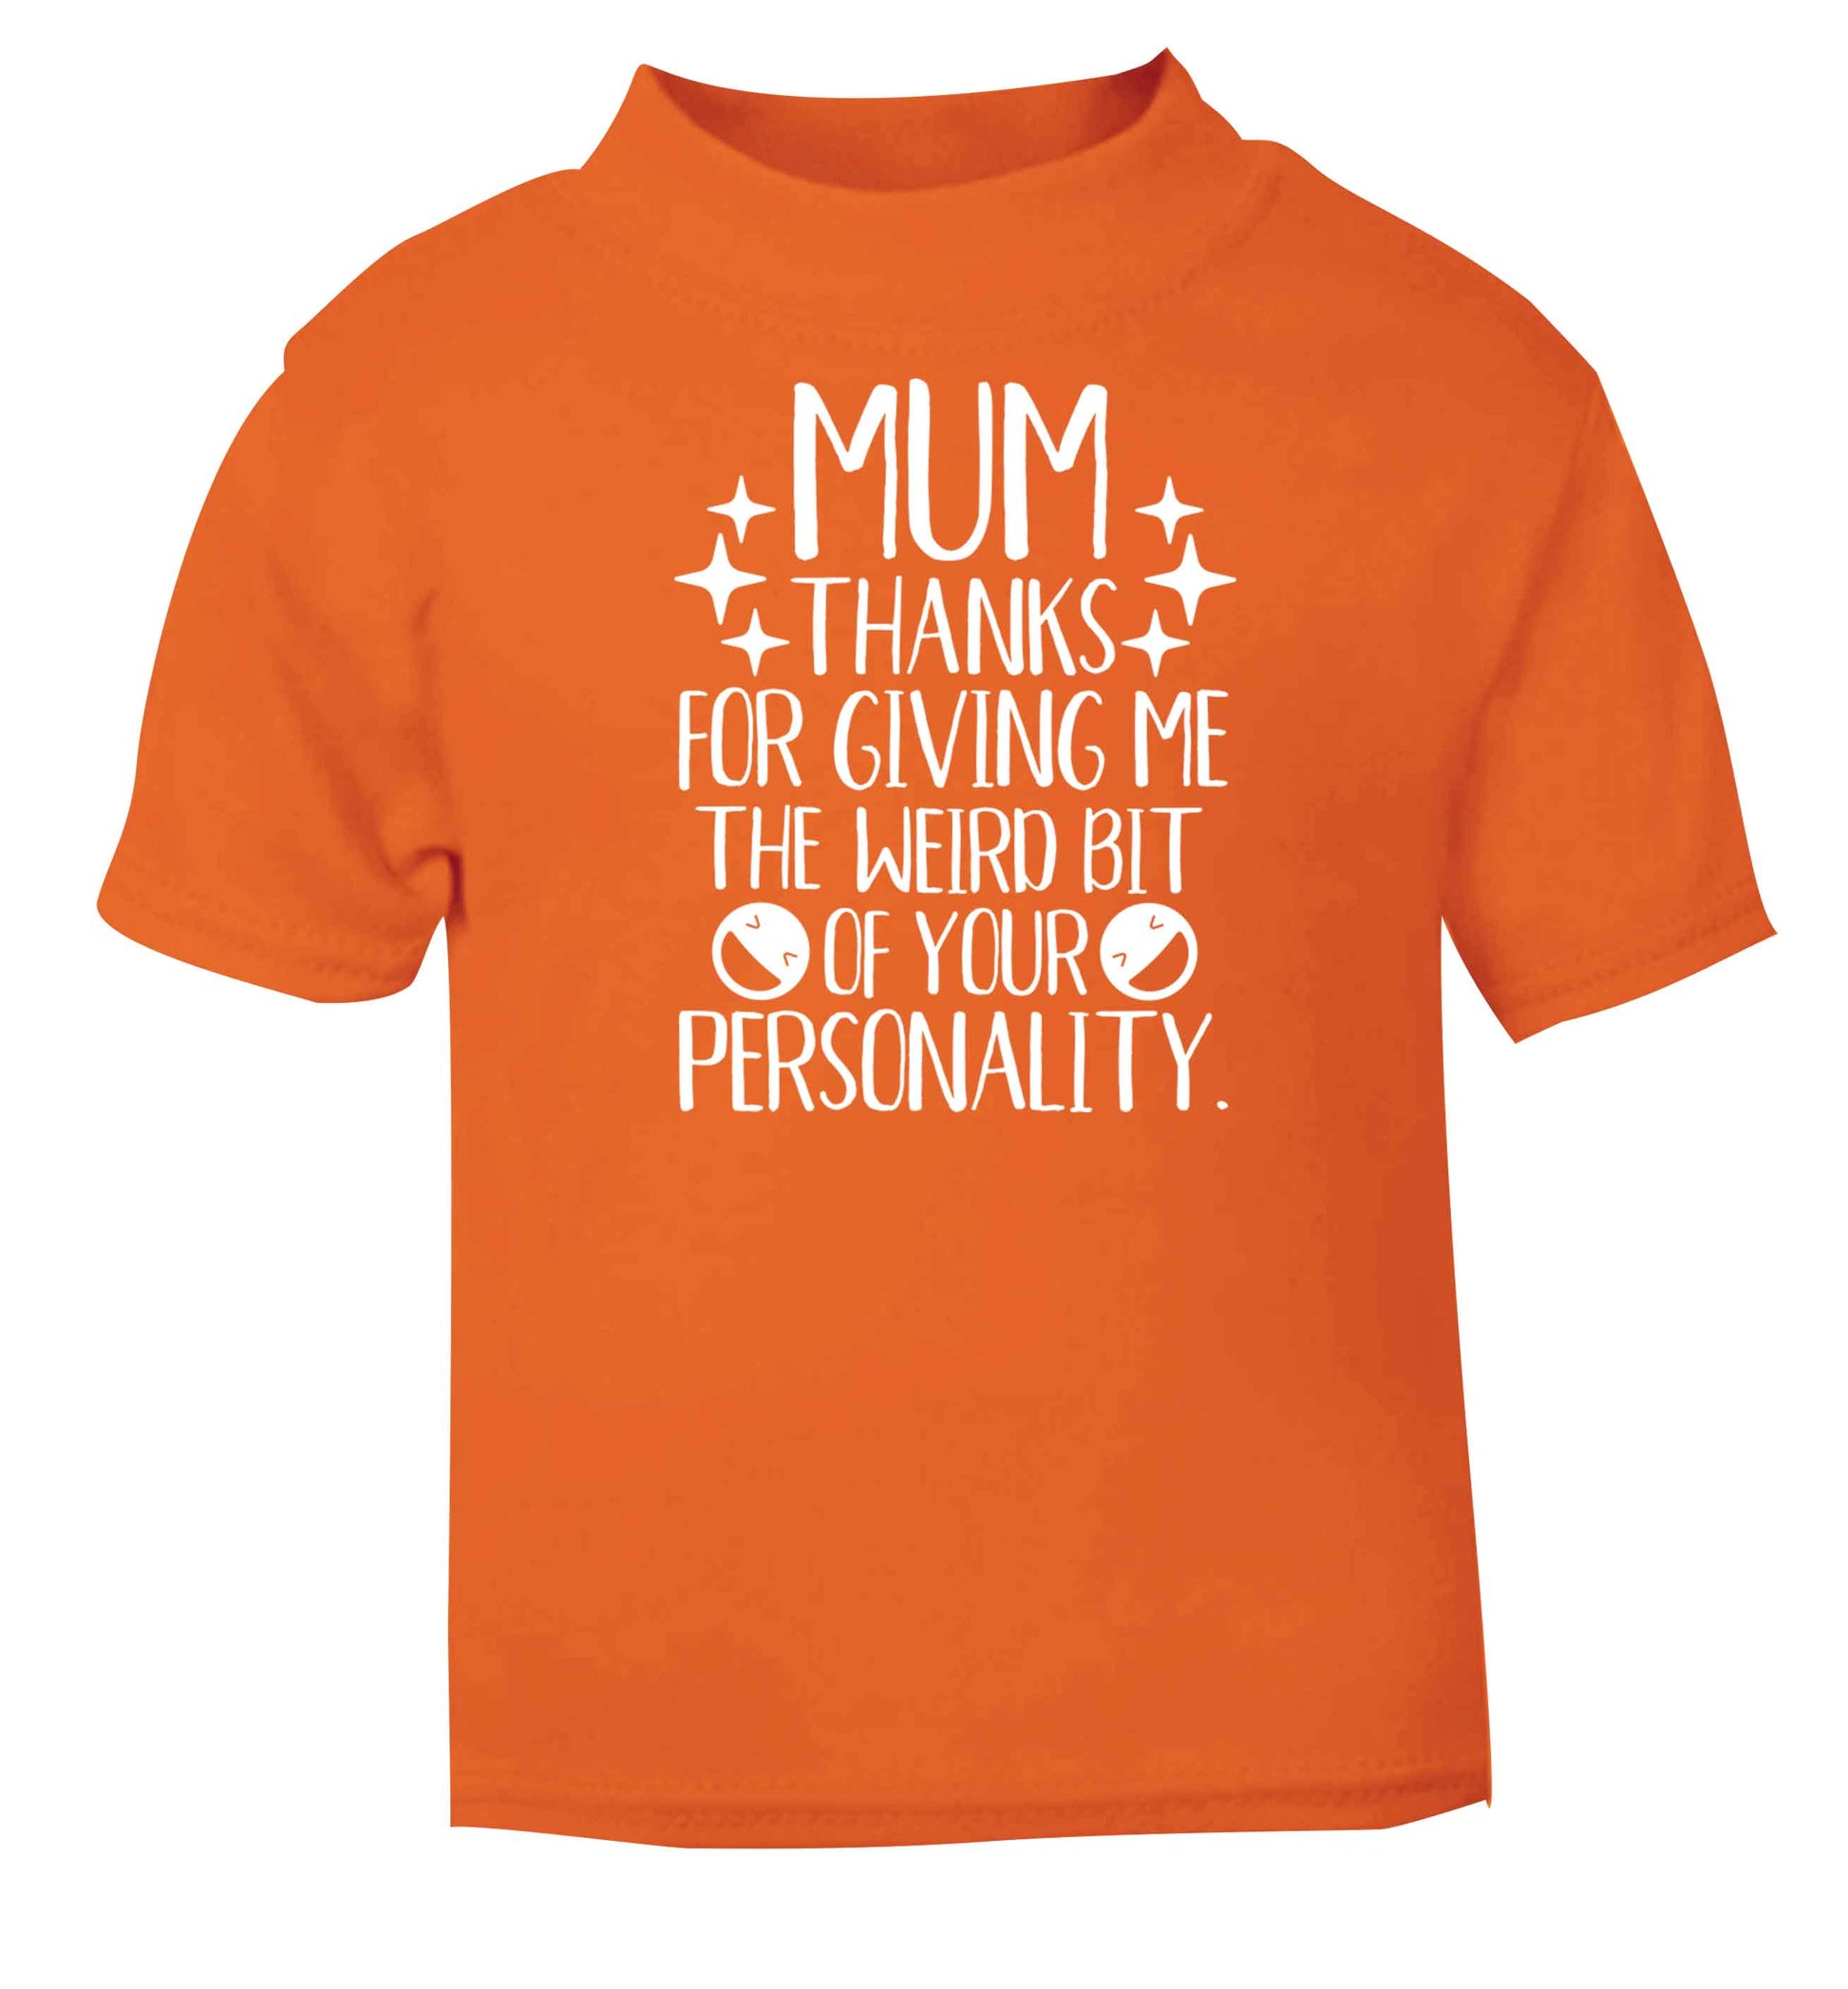 Mum, I love you more than halloumi and if you know me at all you know how deep that is orange baby toddler Tshirt 2 Years